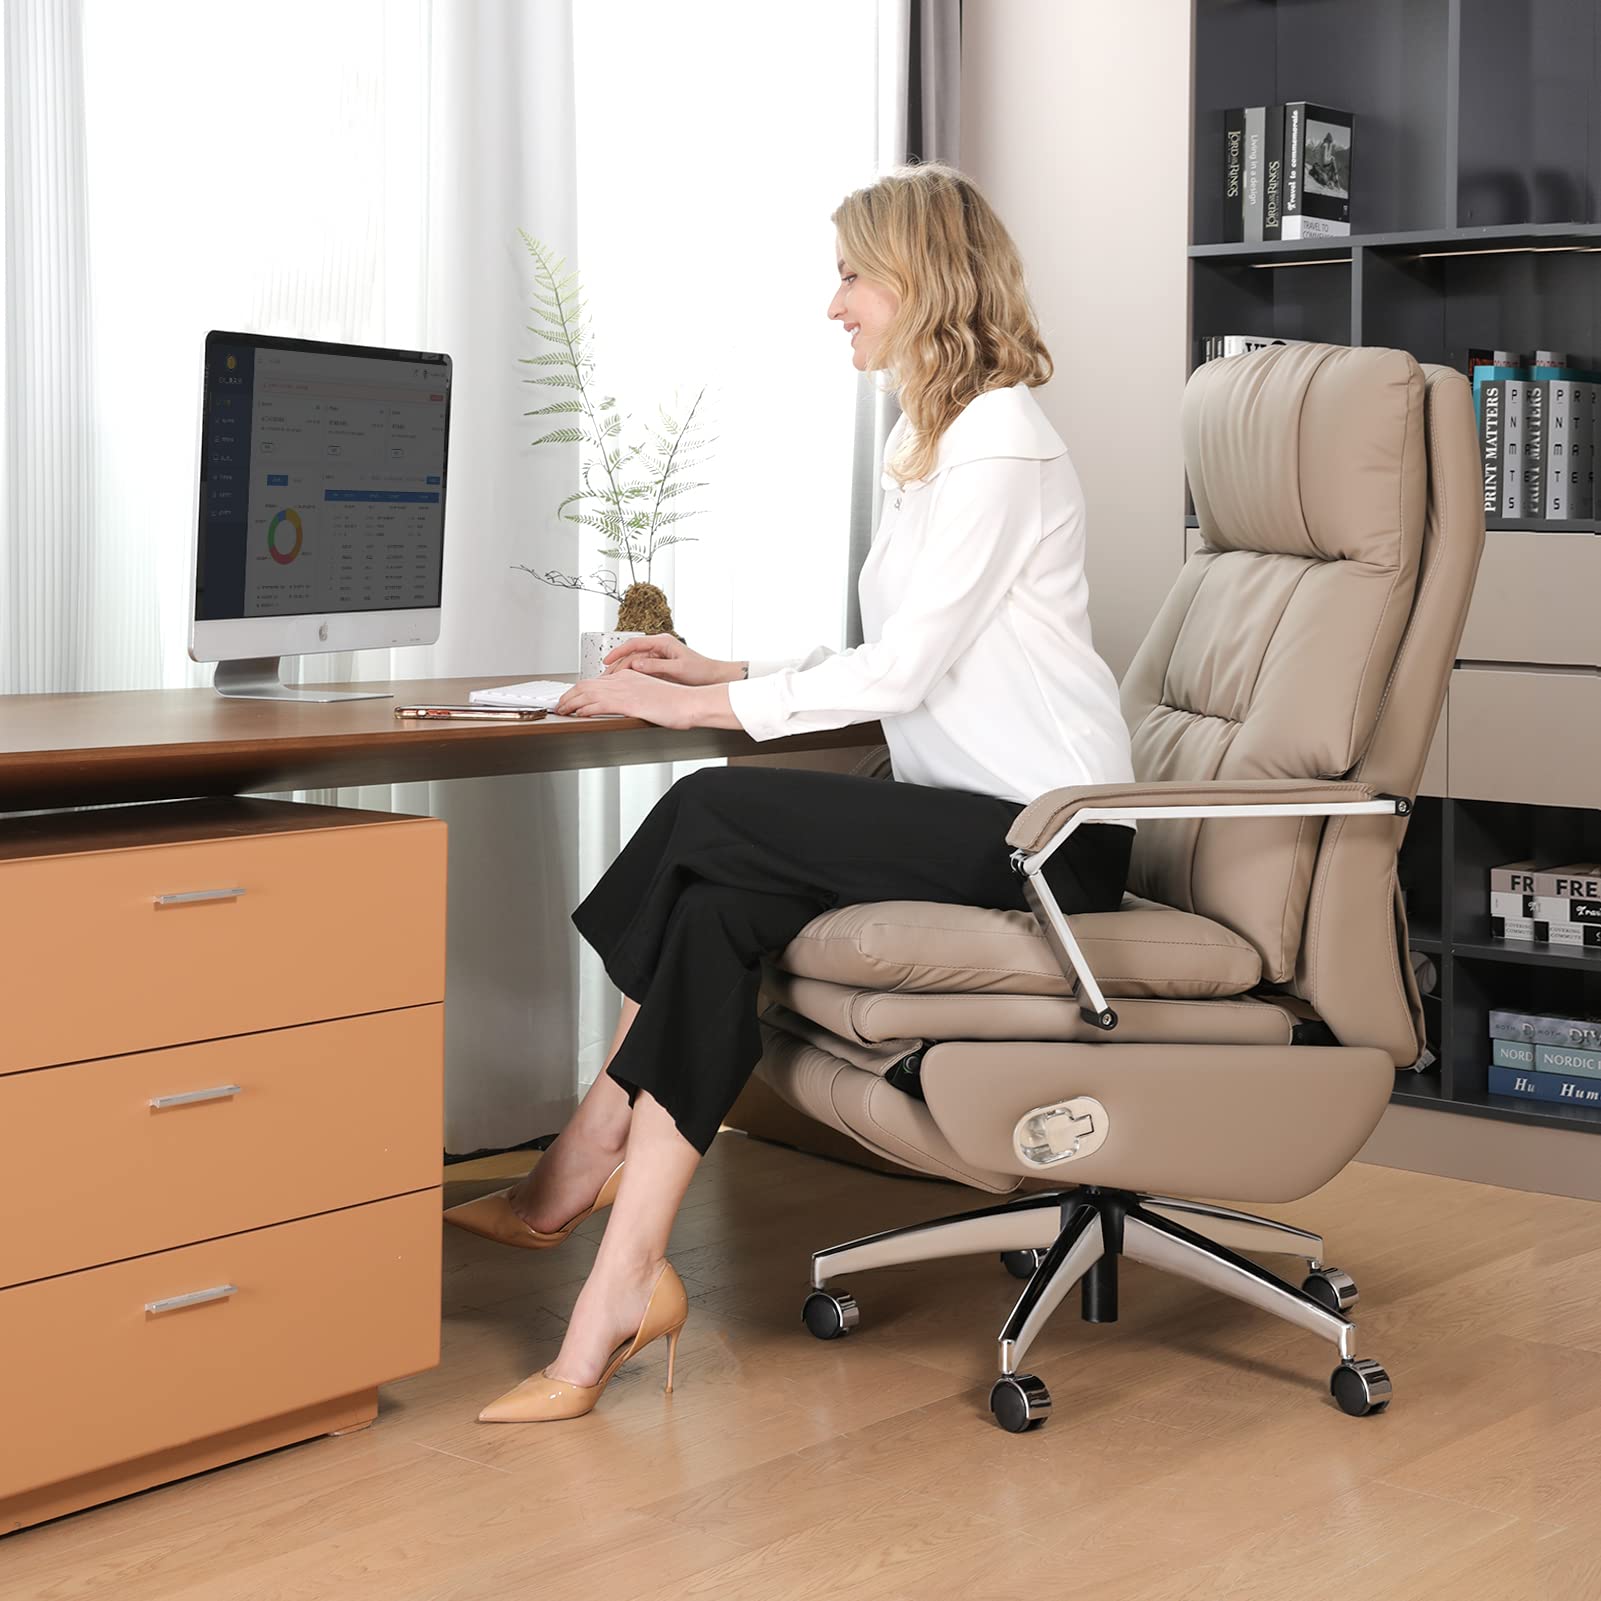 EMIAH Ergonomic Executive Office Chair Big and Tall Reclining Office Chair with Footrest and Lumbar Support Computer Rolling Desk Chair Electric High Back Comfortable Chair for Heavy People